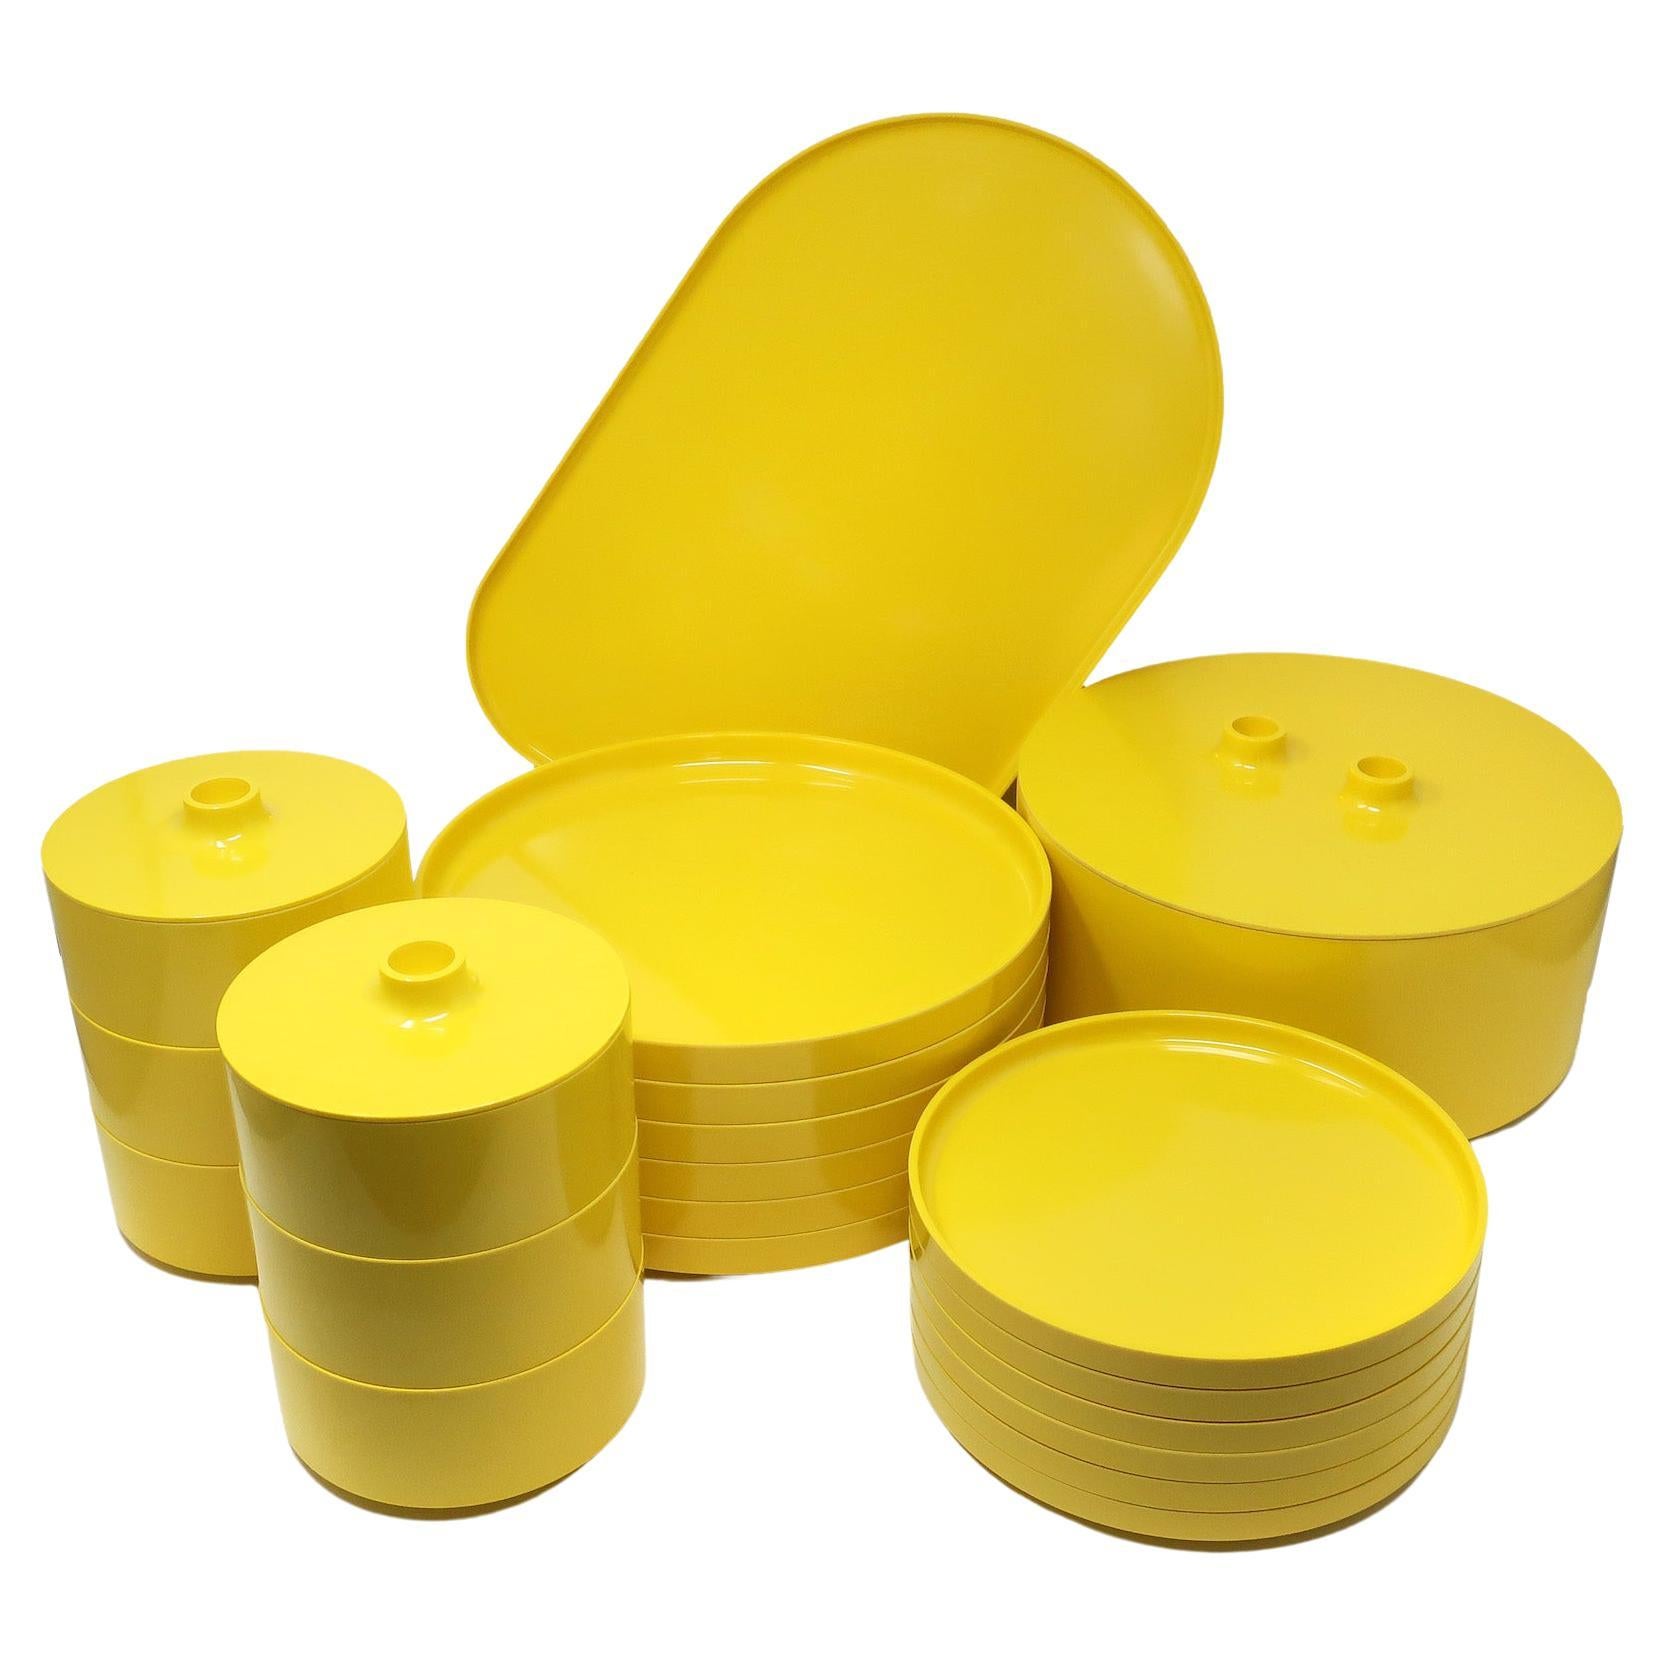 Yellow Dinnerware by Vignelli for Heller, Service for 6